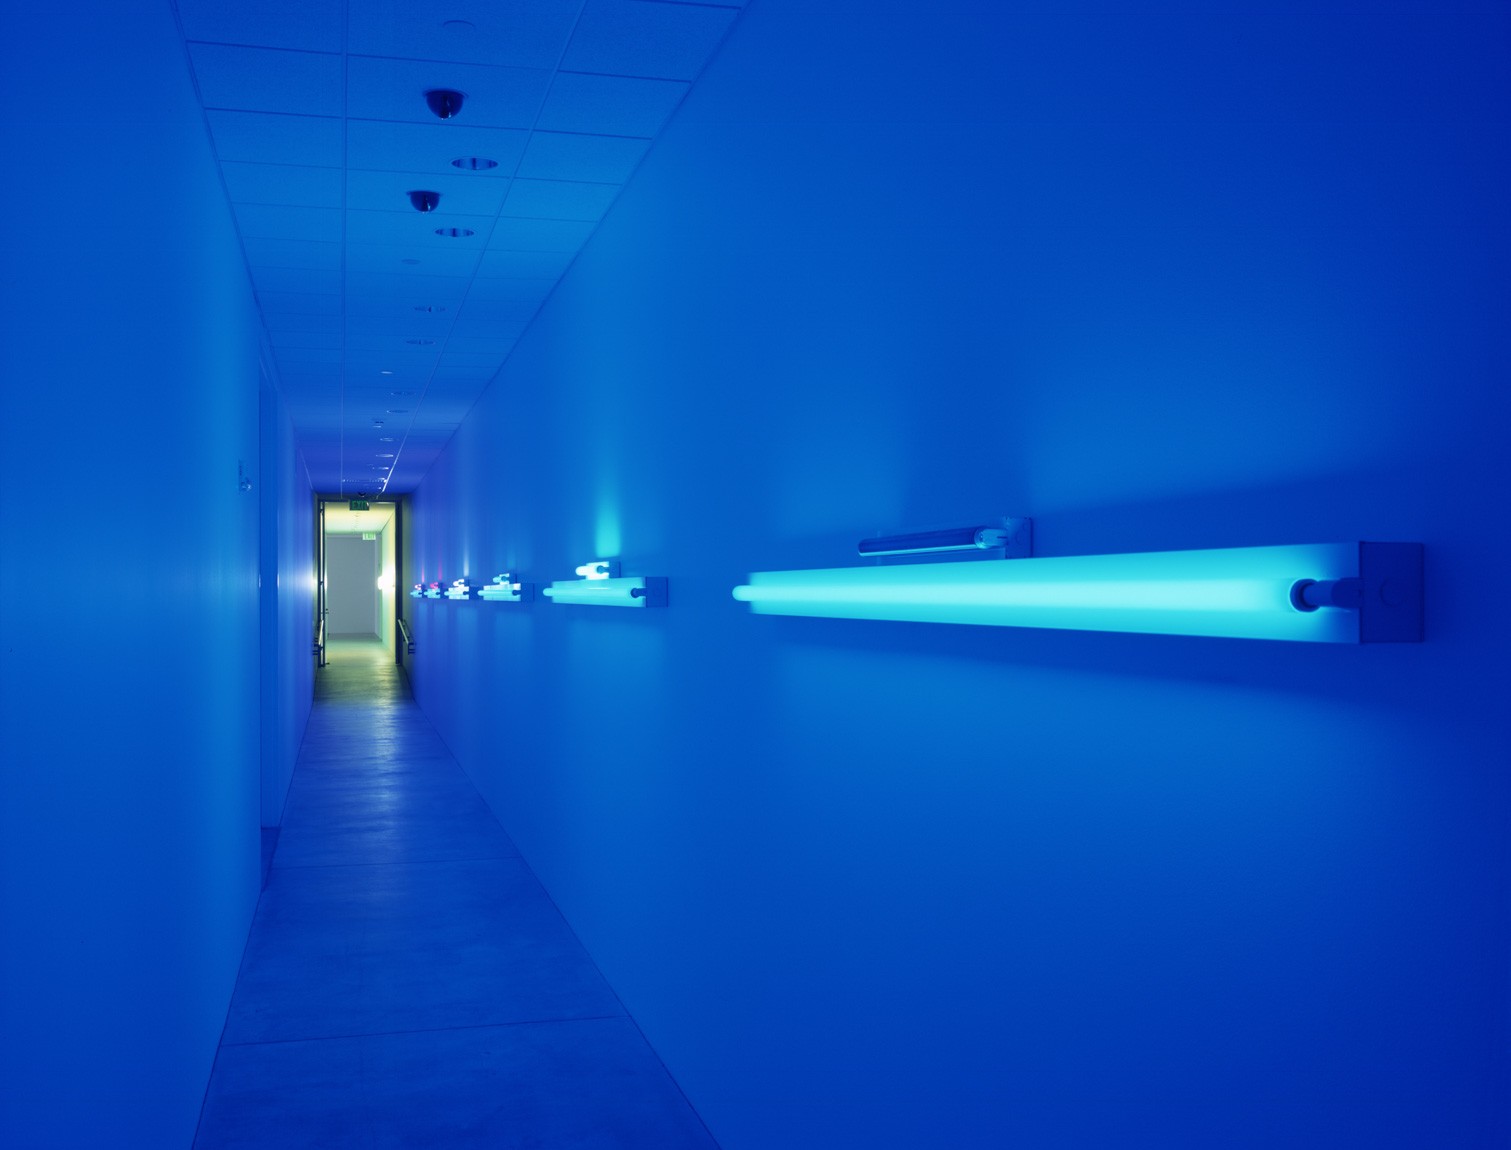 Six pieces by Flavin each titled "untitled (for Charlotte and Jim Brooks)" are installed in a row in a dark, glowing, blue Lower Hallway. They are blue fluorescent beams with smaller beams of different colors centered above them.